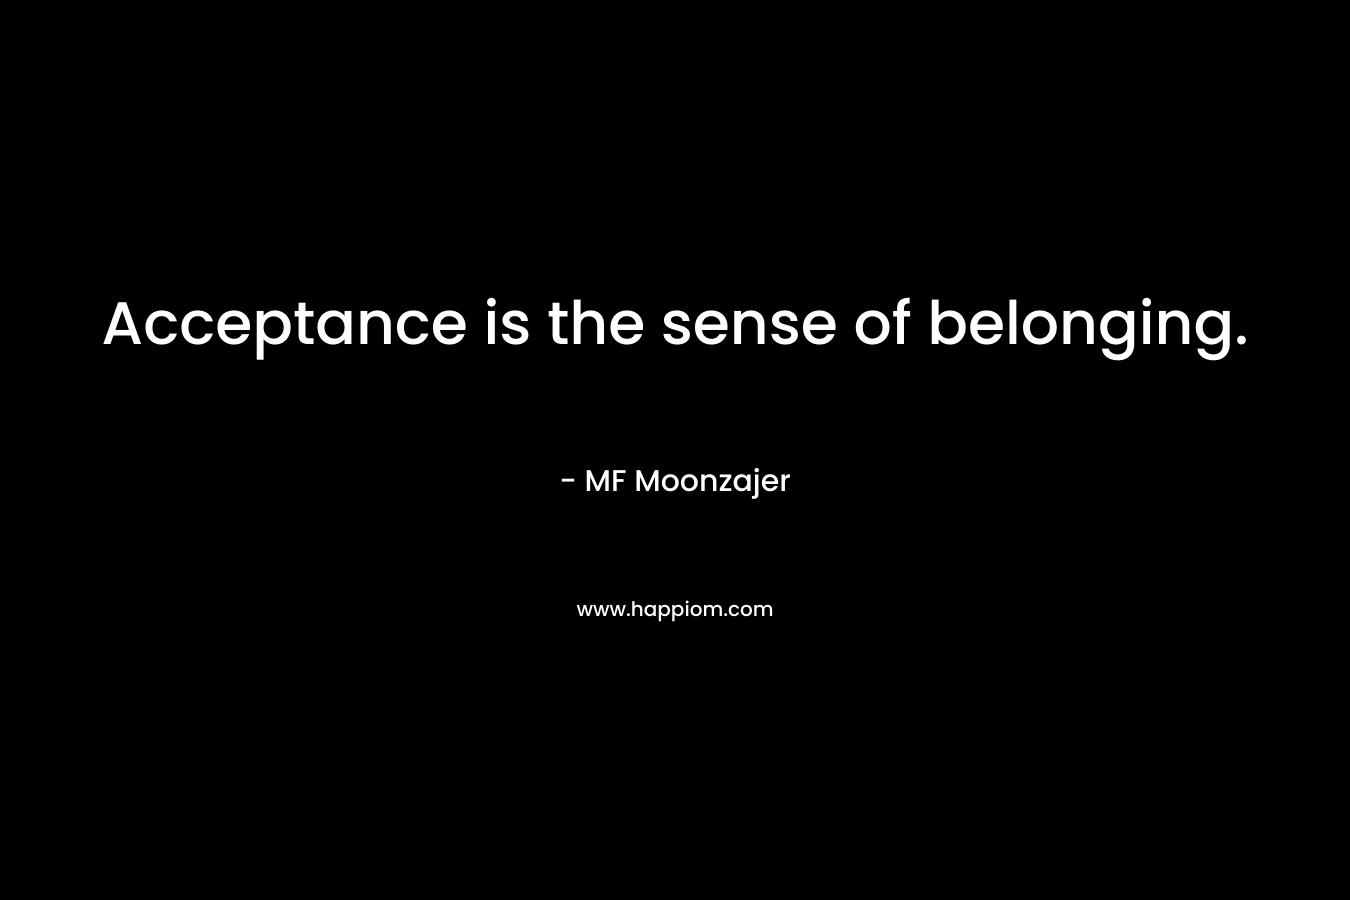 Acceptance is the sense of belonging.